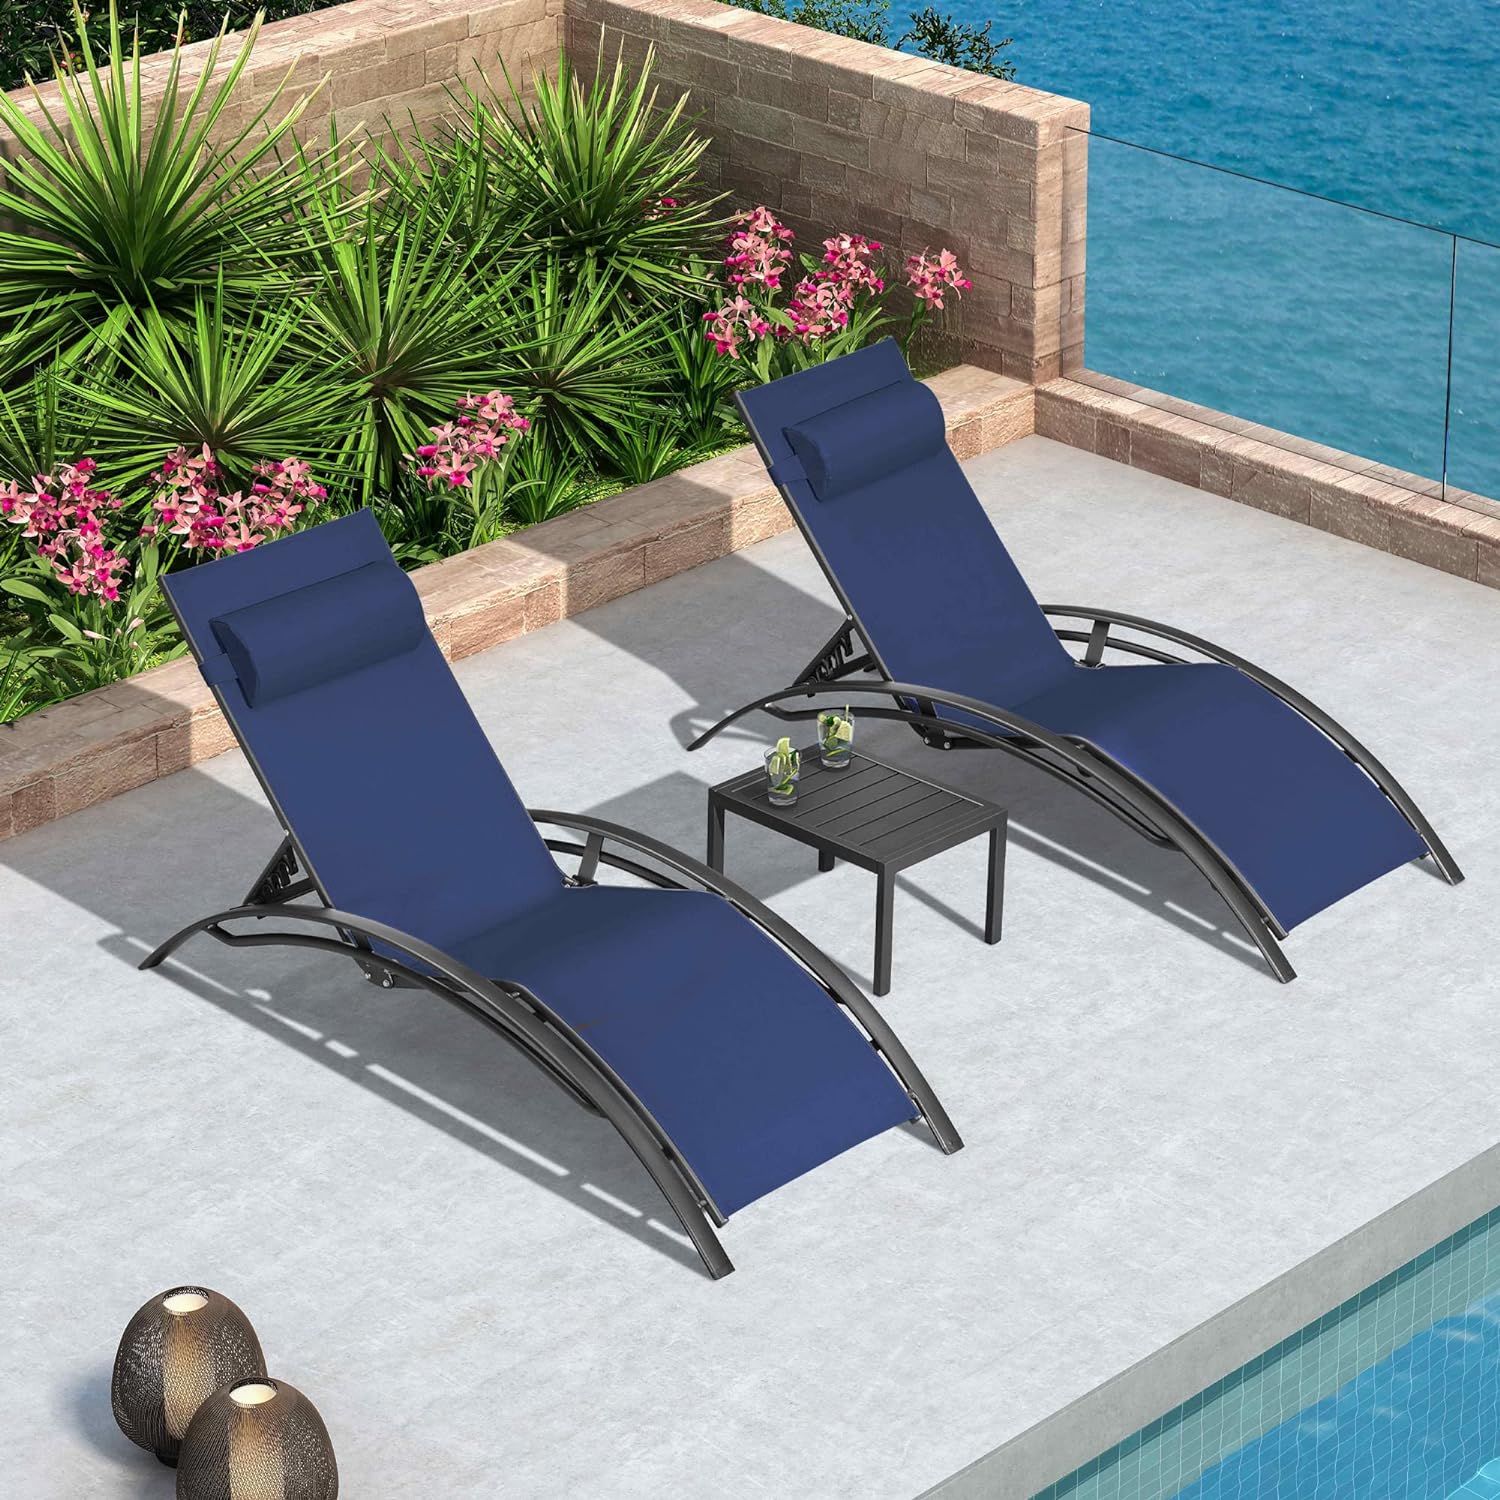 PURPLE LEAF Patio Chaise Lounge Set Outdoor Beach Pool Sunbathing Lawn Lounger Recliner Outside Tanning Chairs with Arm for All Weather Side Table Included Navy Blue